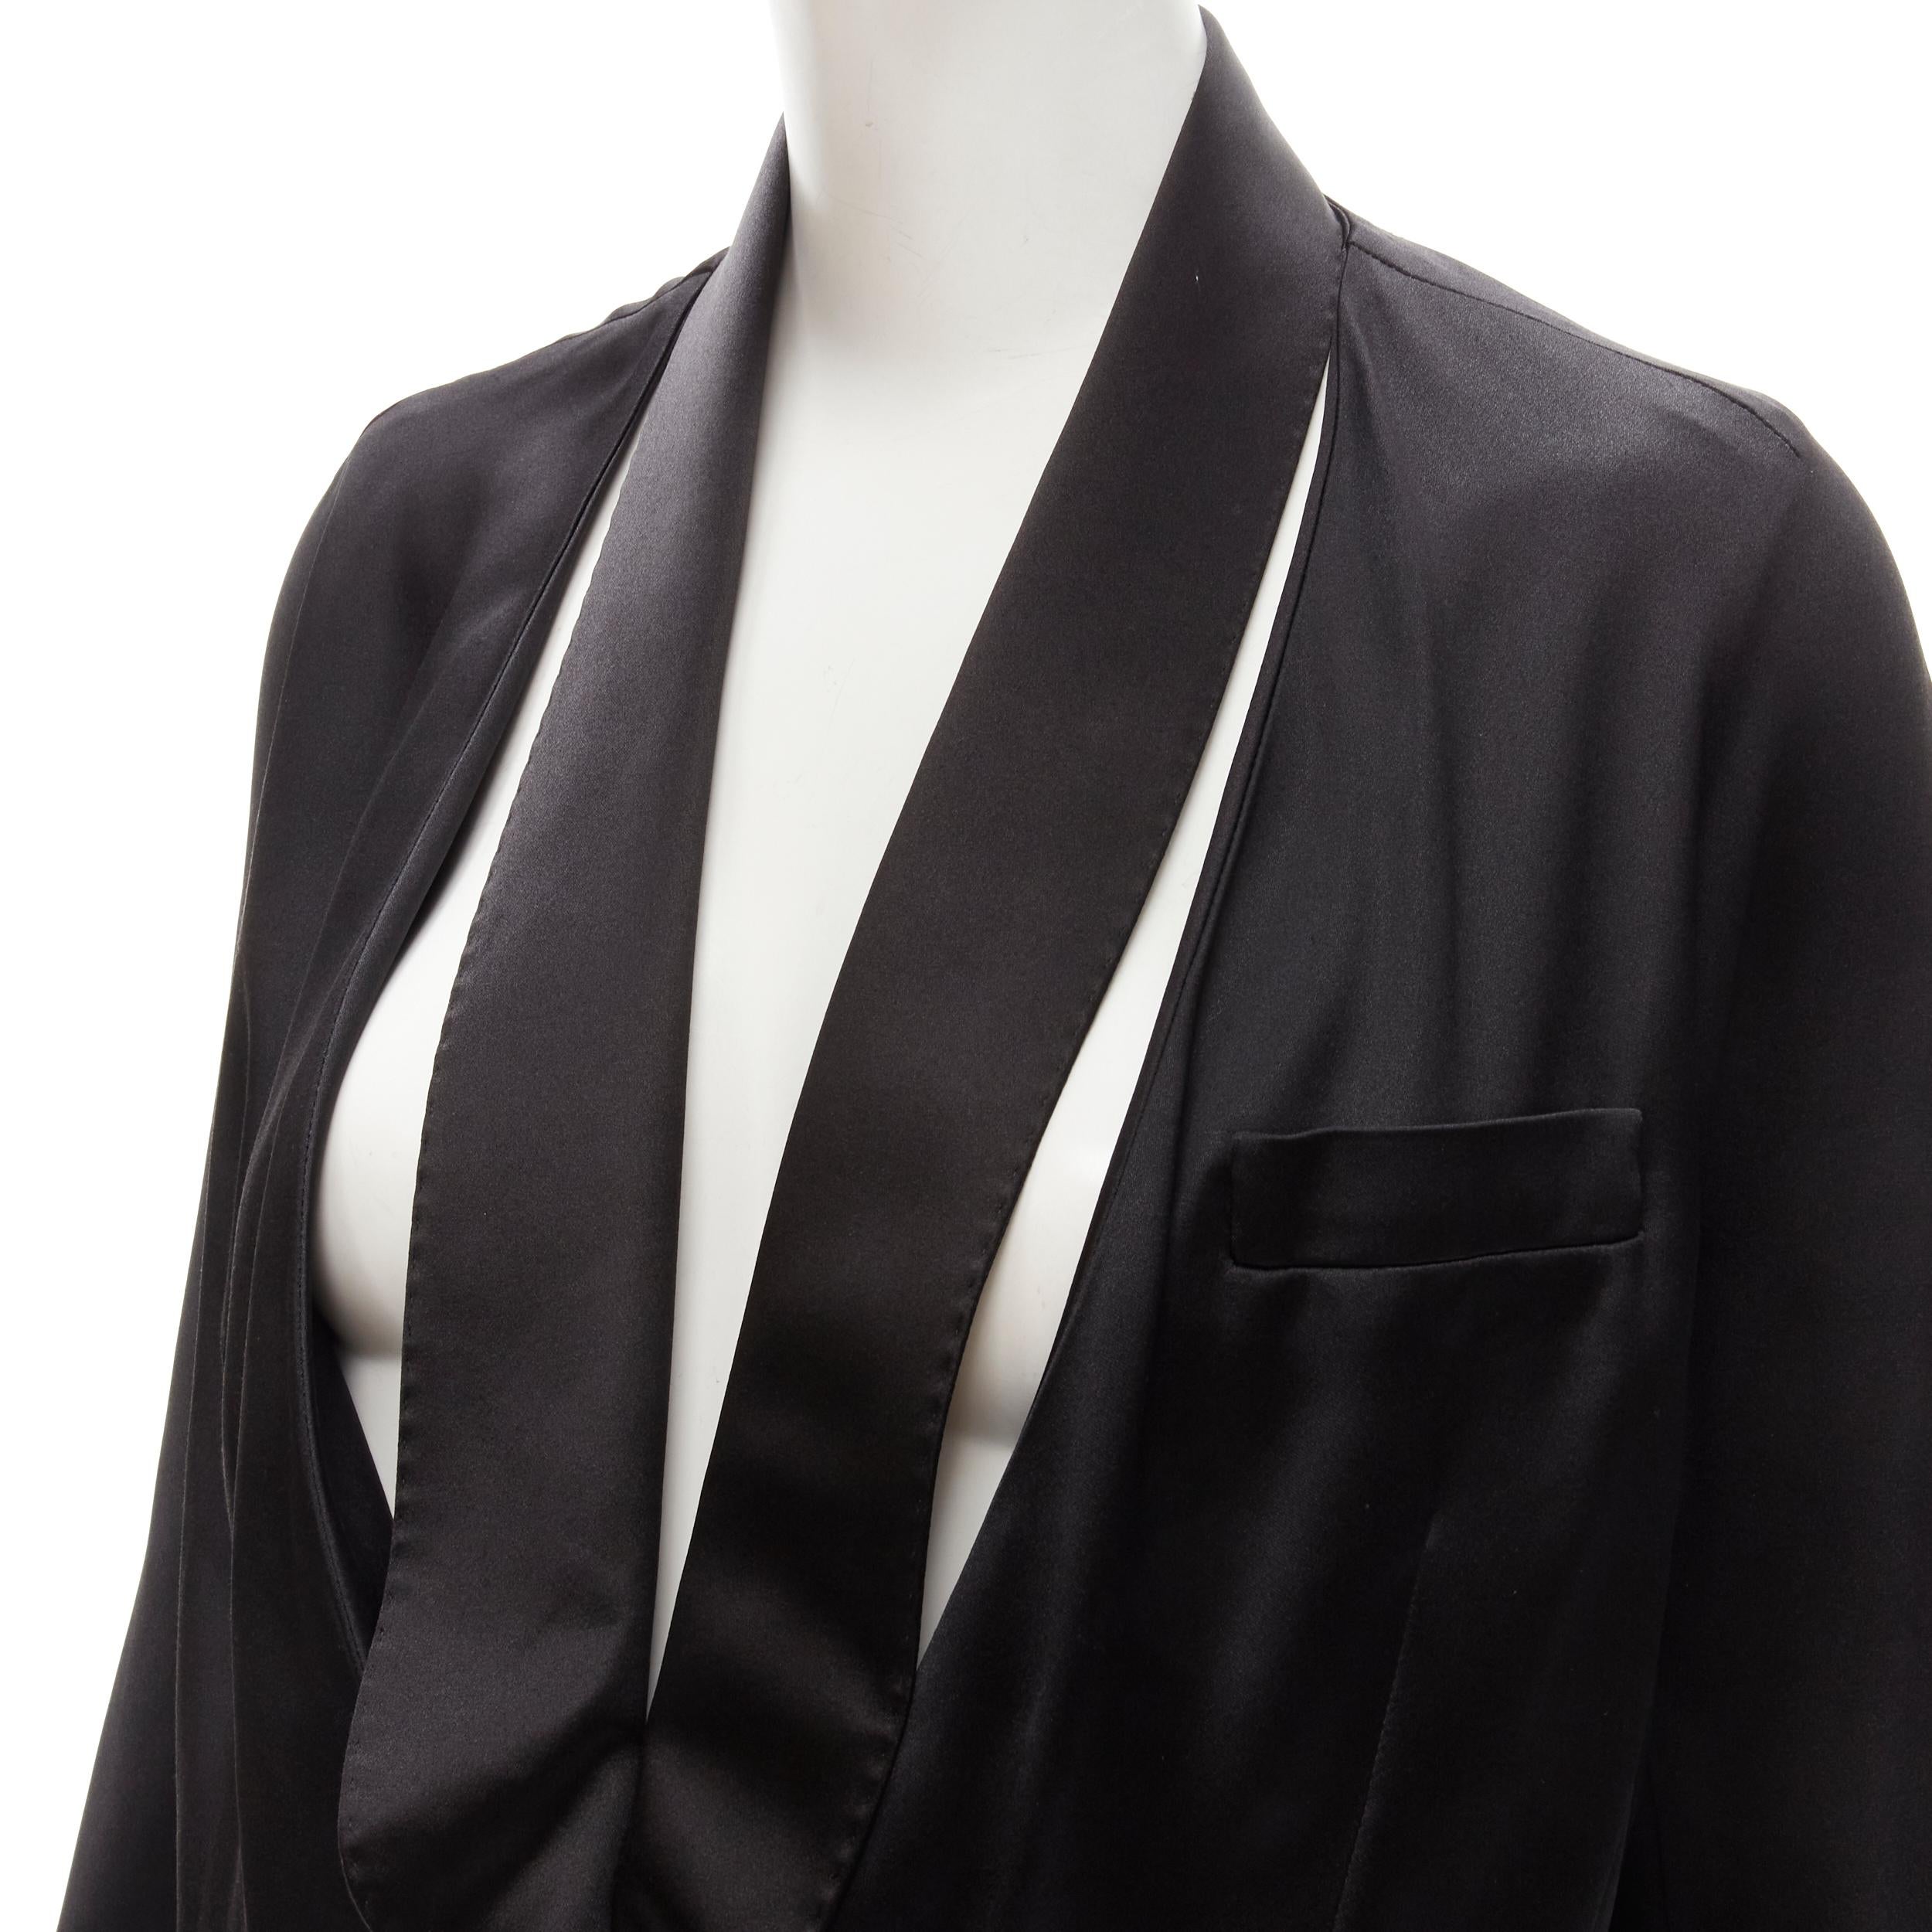 GIVENCHY Riccardo Tisci silk black cut out collar kimono robe blazer FR34 XS
Brand: Givenchy
Designer: Riccardo Tisci
Material: Silk
Color: Black
Pattern: Solid
Closure: Button
Extra Detail: Shawl cut out collar. Rounded sleeves. Dual slit pockets